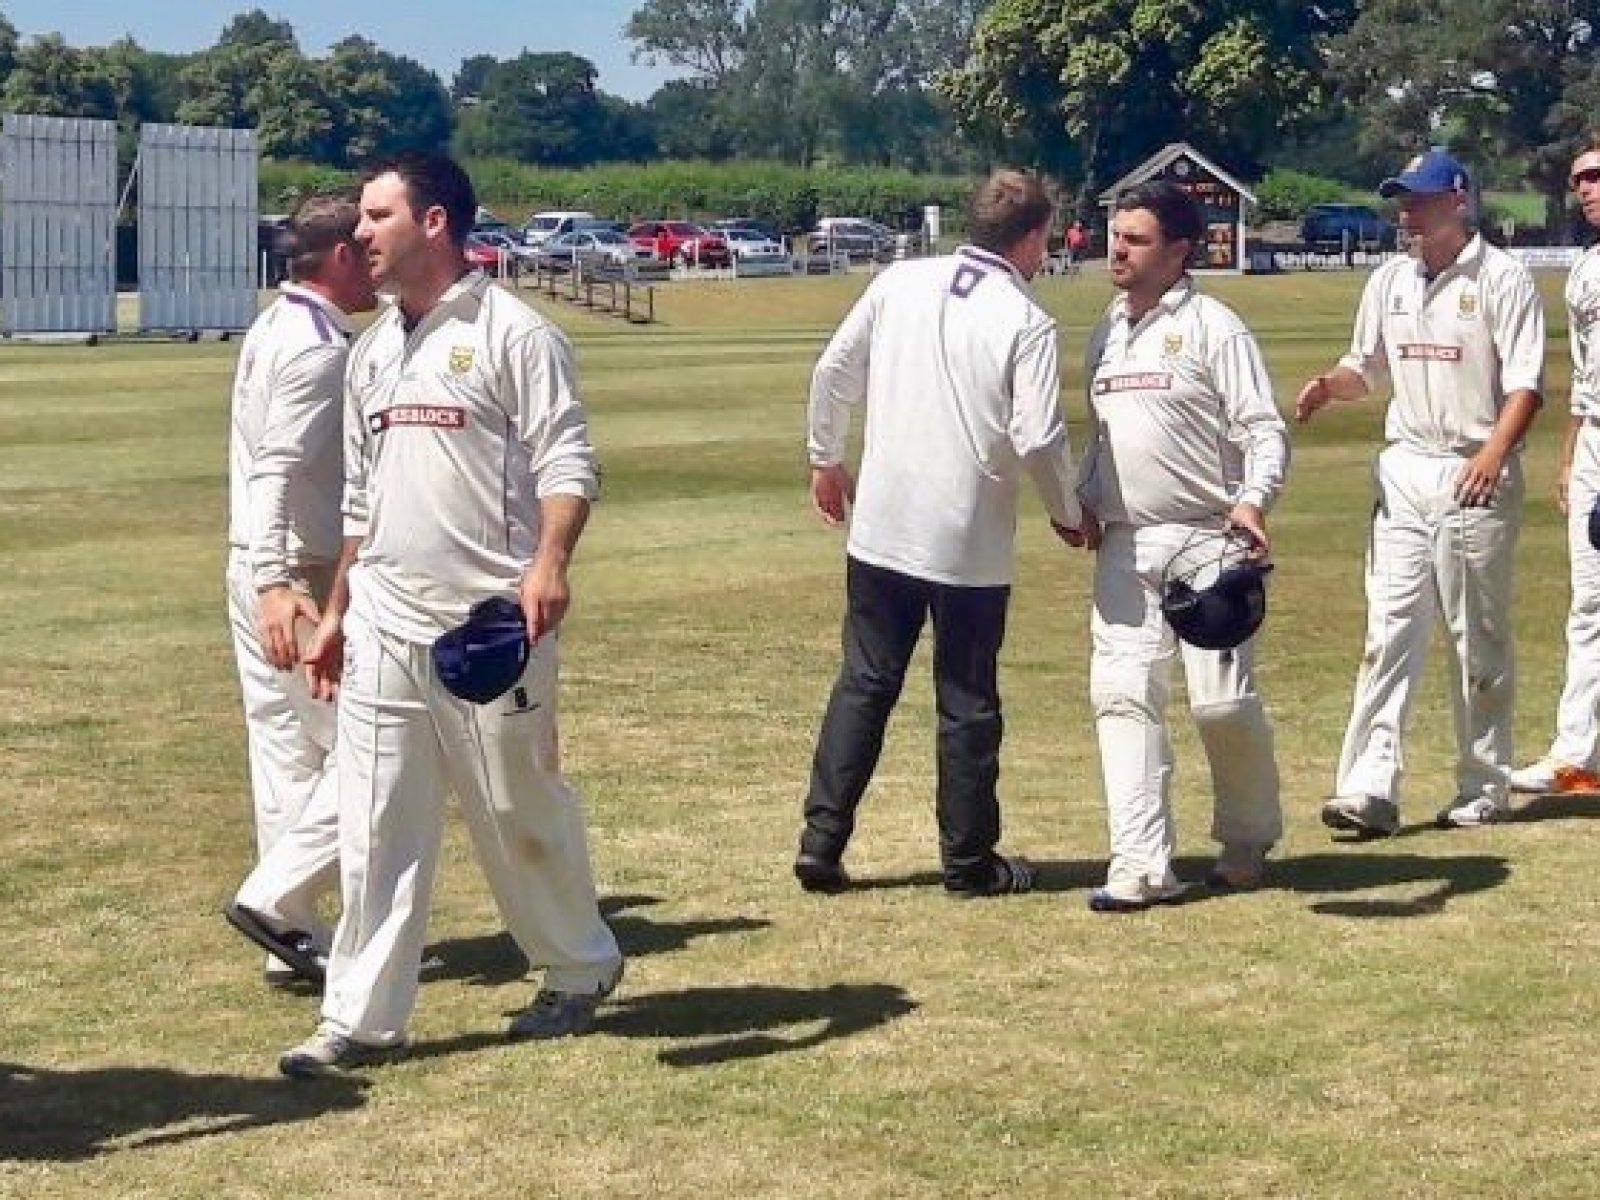 Steve-Leach-leads-the-Shropshire-players-off-the-field-after-beating-Cheshire-website-photo